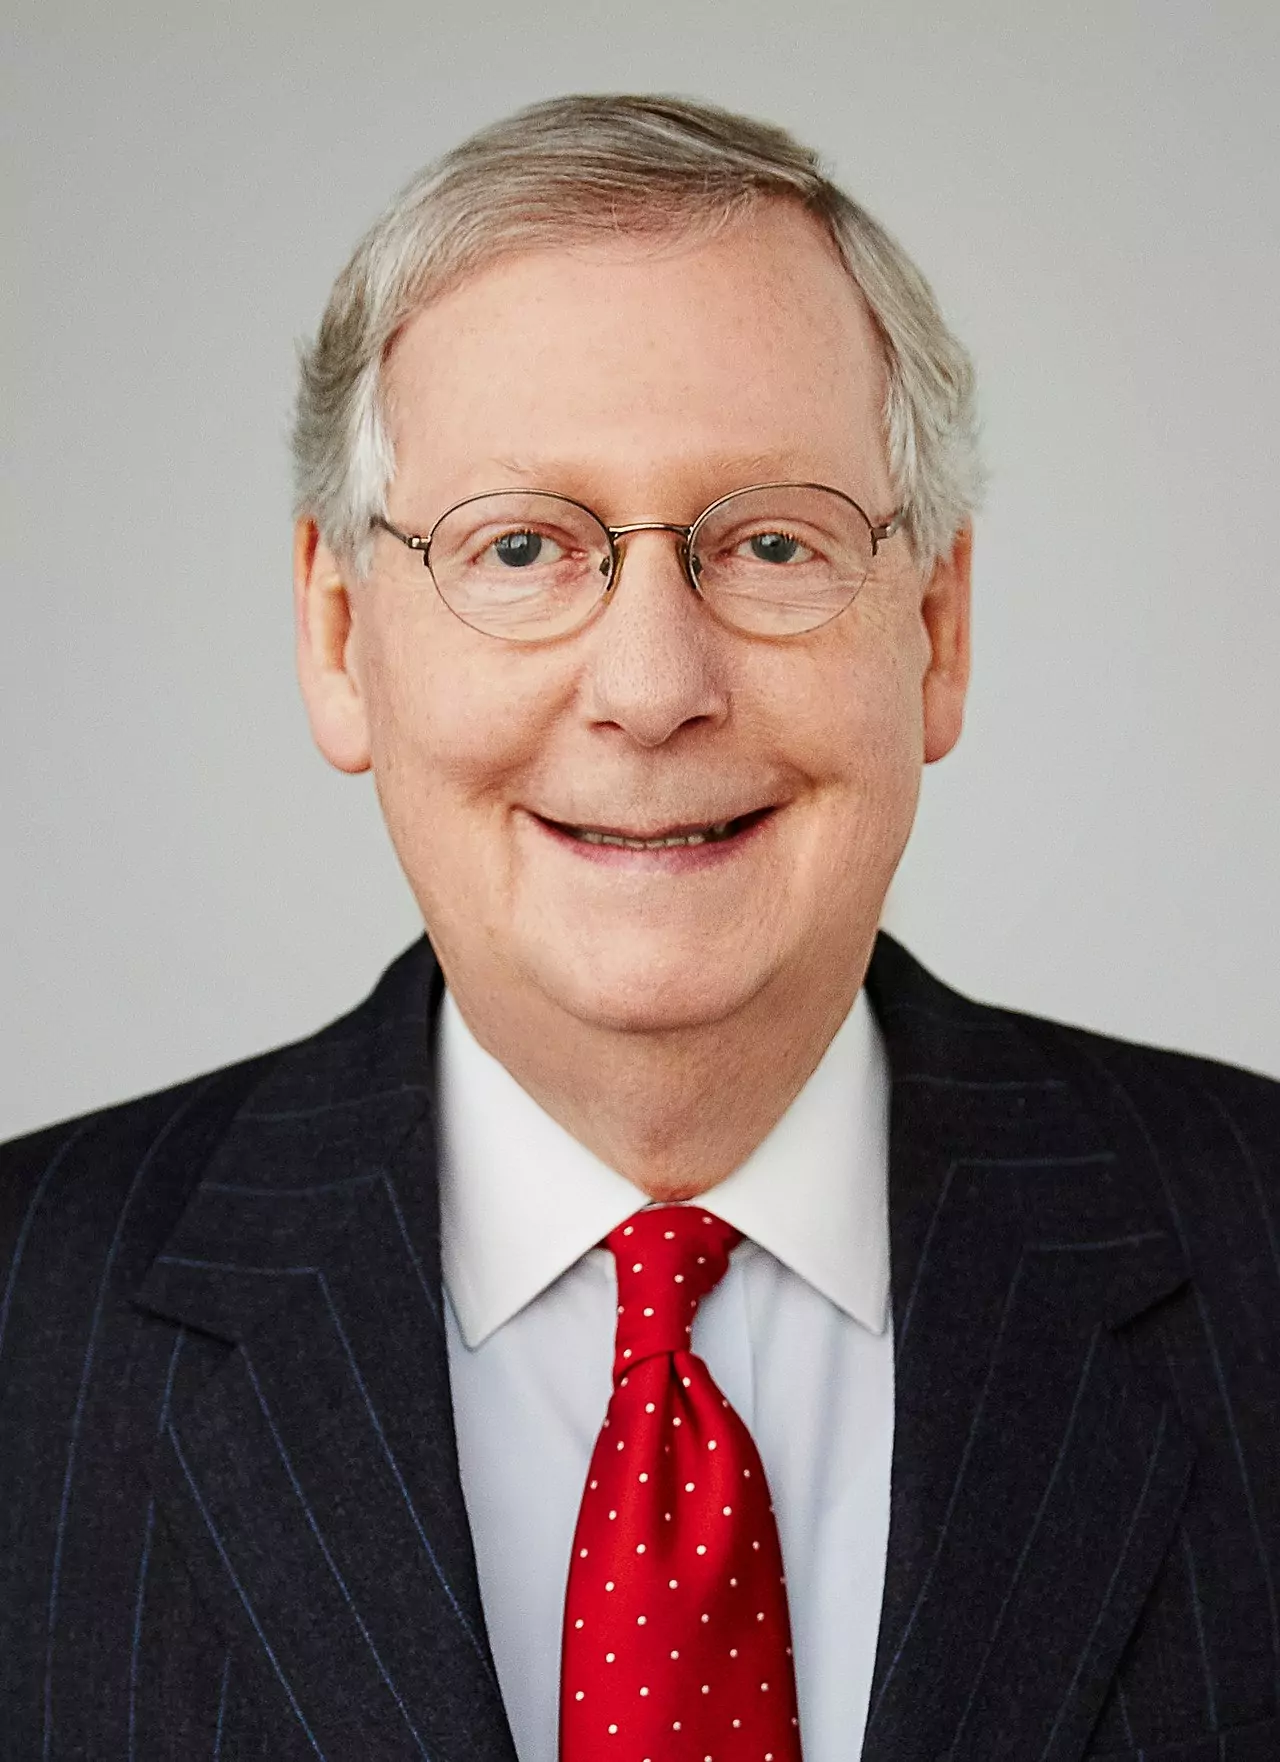 Mitch McConnell Hospitalized Again: Kentucky Senator and Minority Leader Absent from Senate Due to Injury